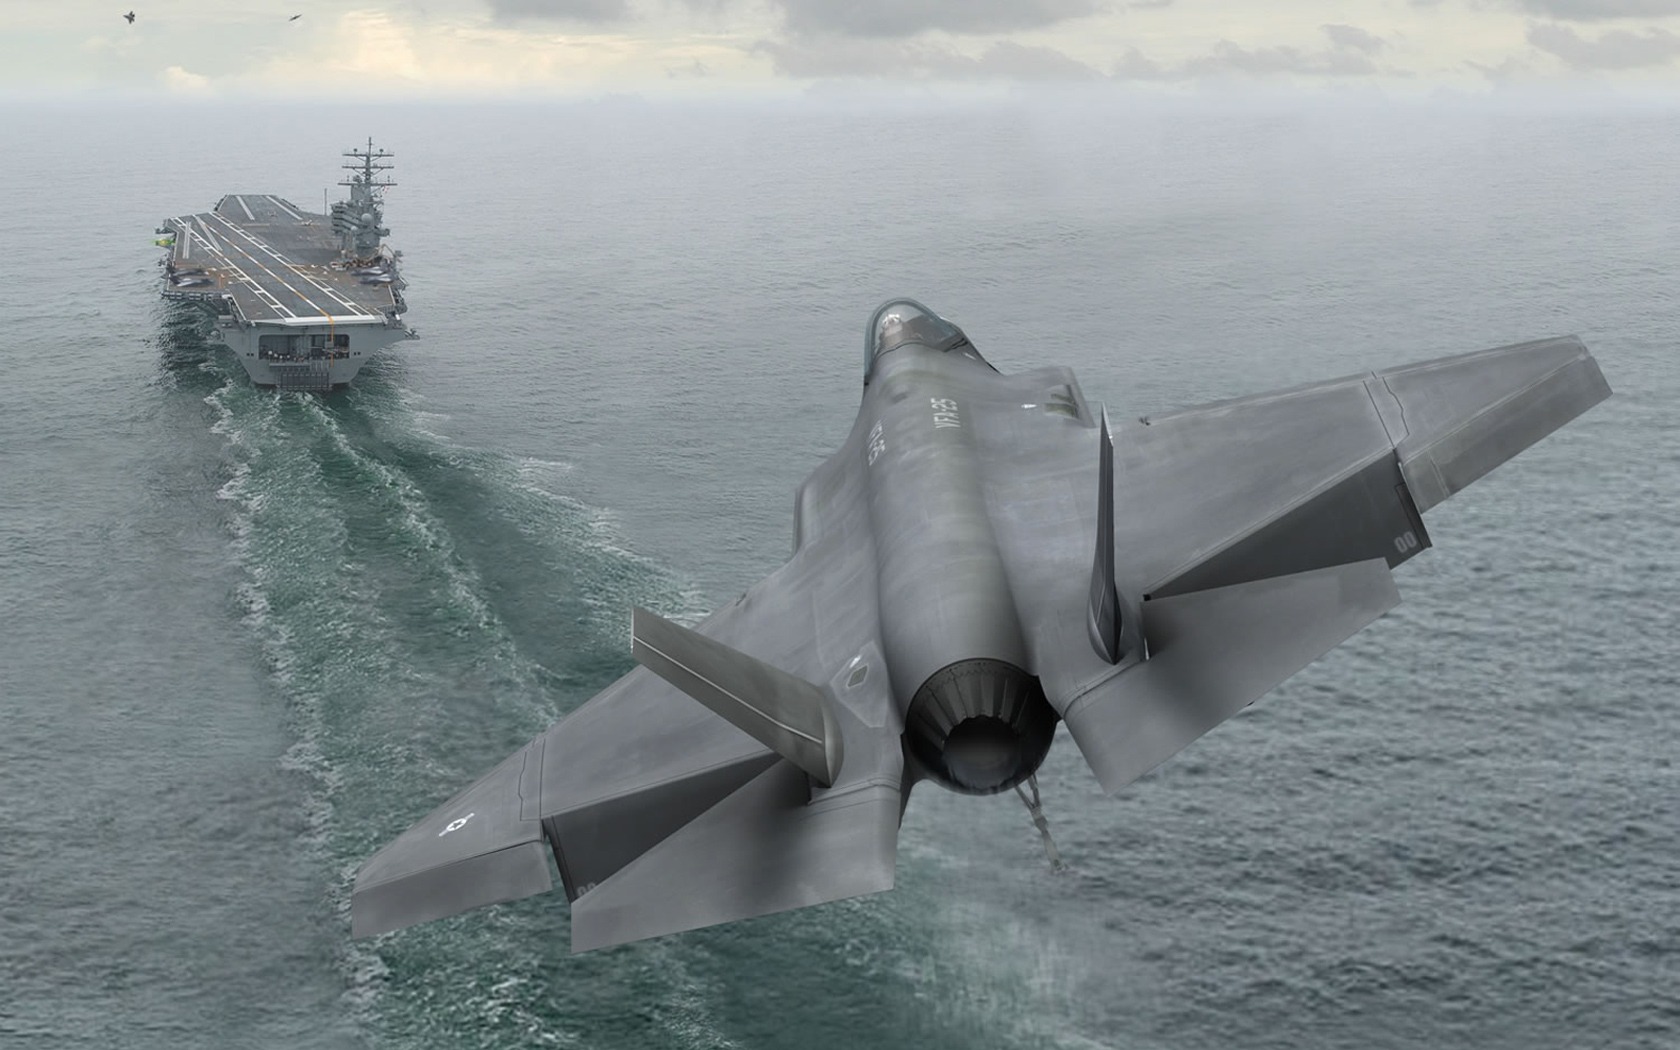 Planting fighter F 35 wallpapers and images - wallpapers, pictures ...